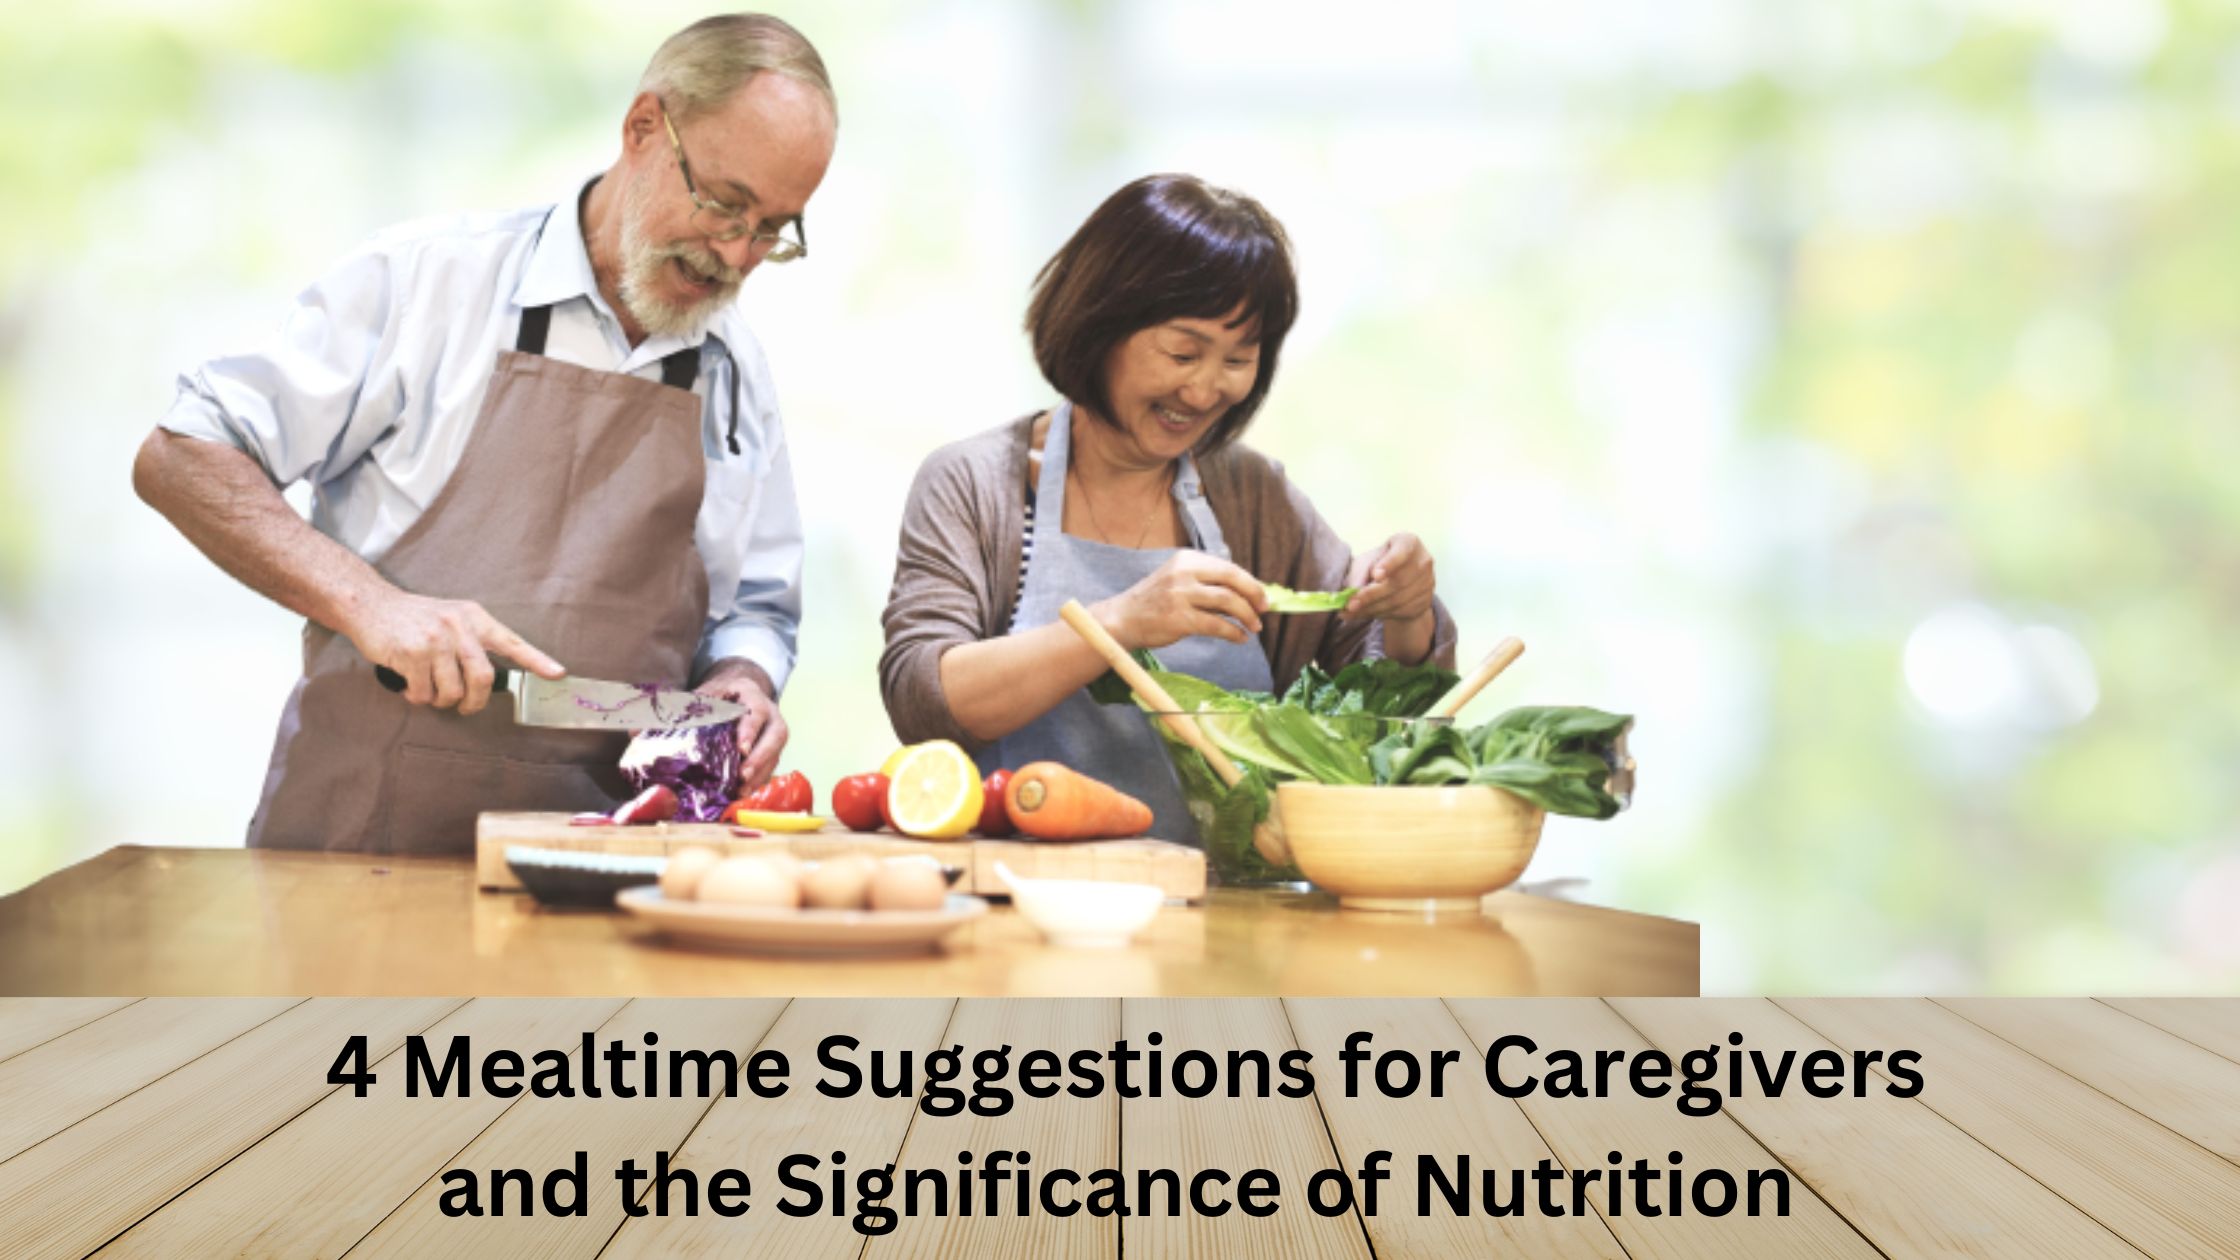 4 Mealtime Suggestions for Caregivers and the Significance of Nutrition